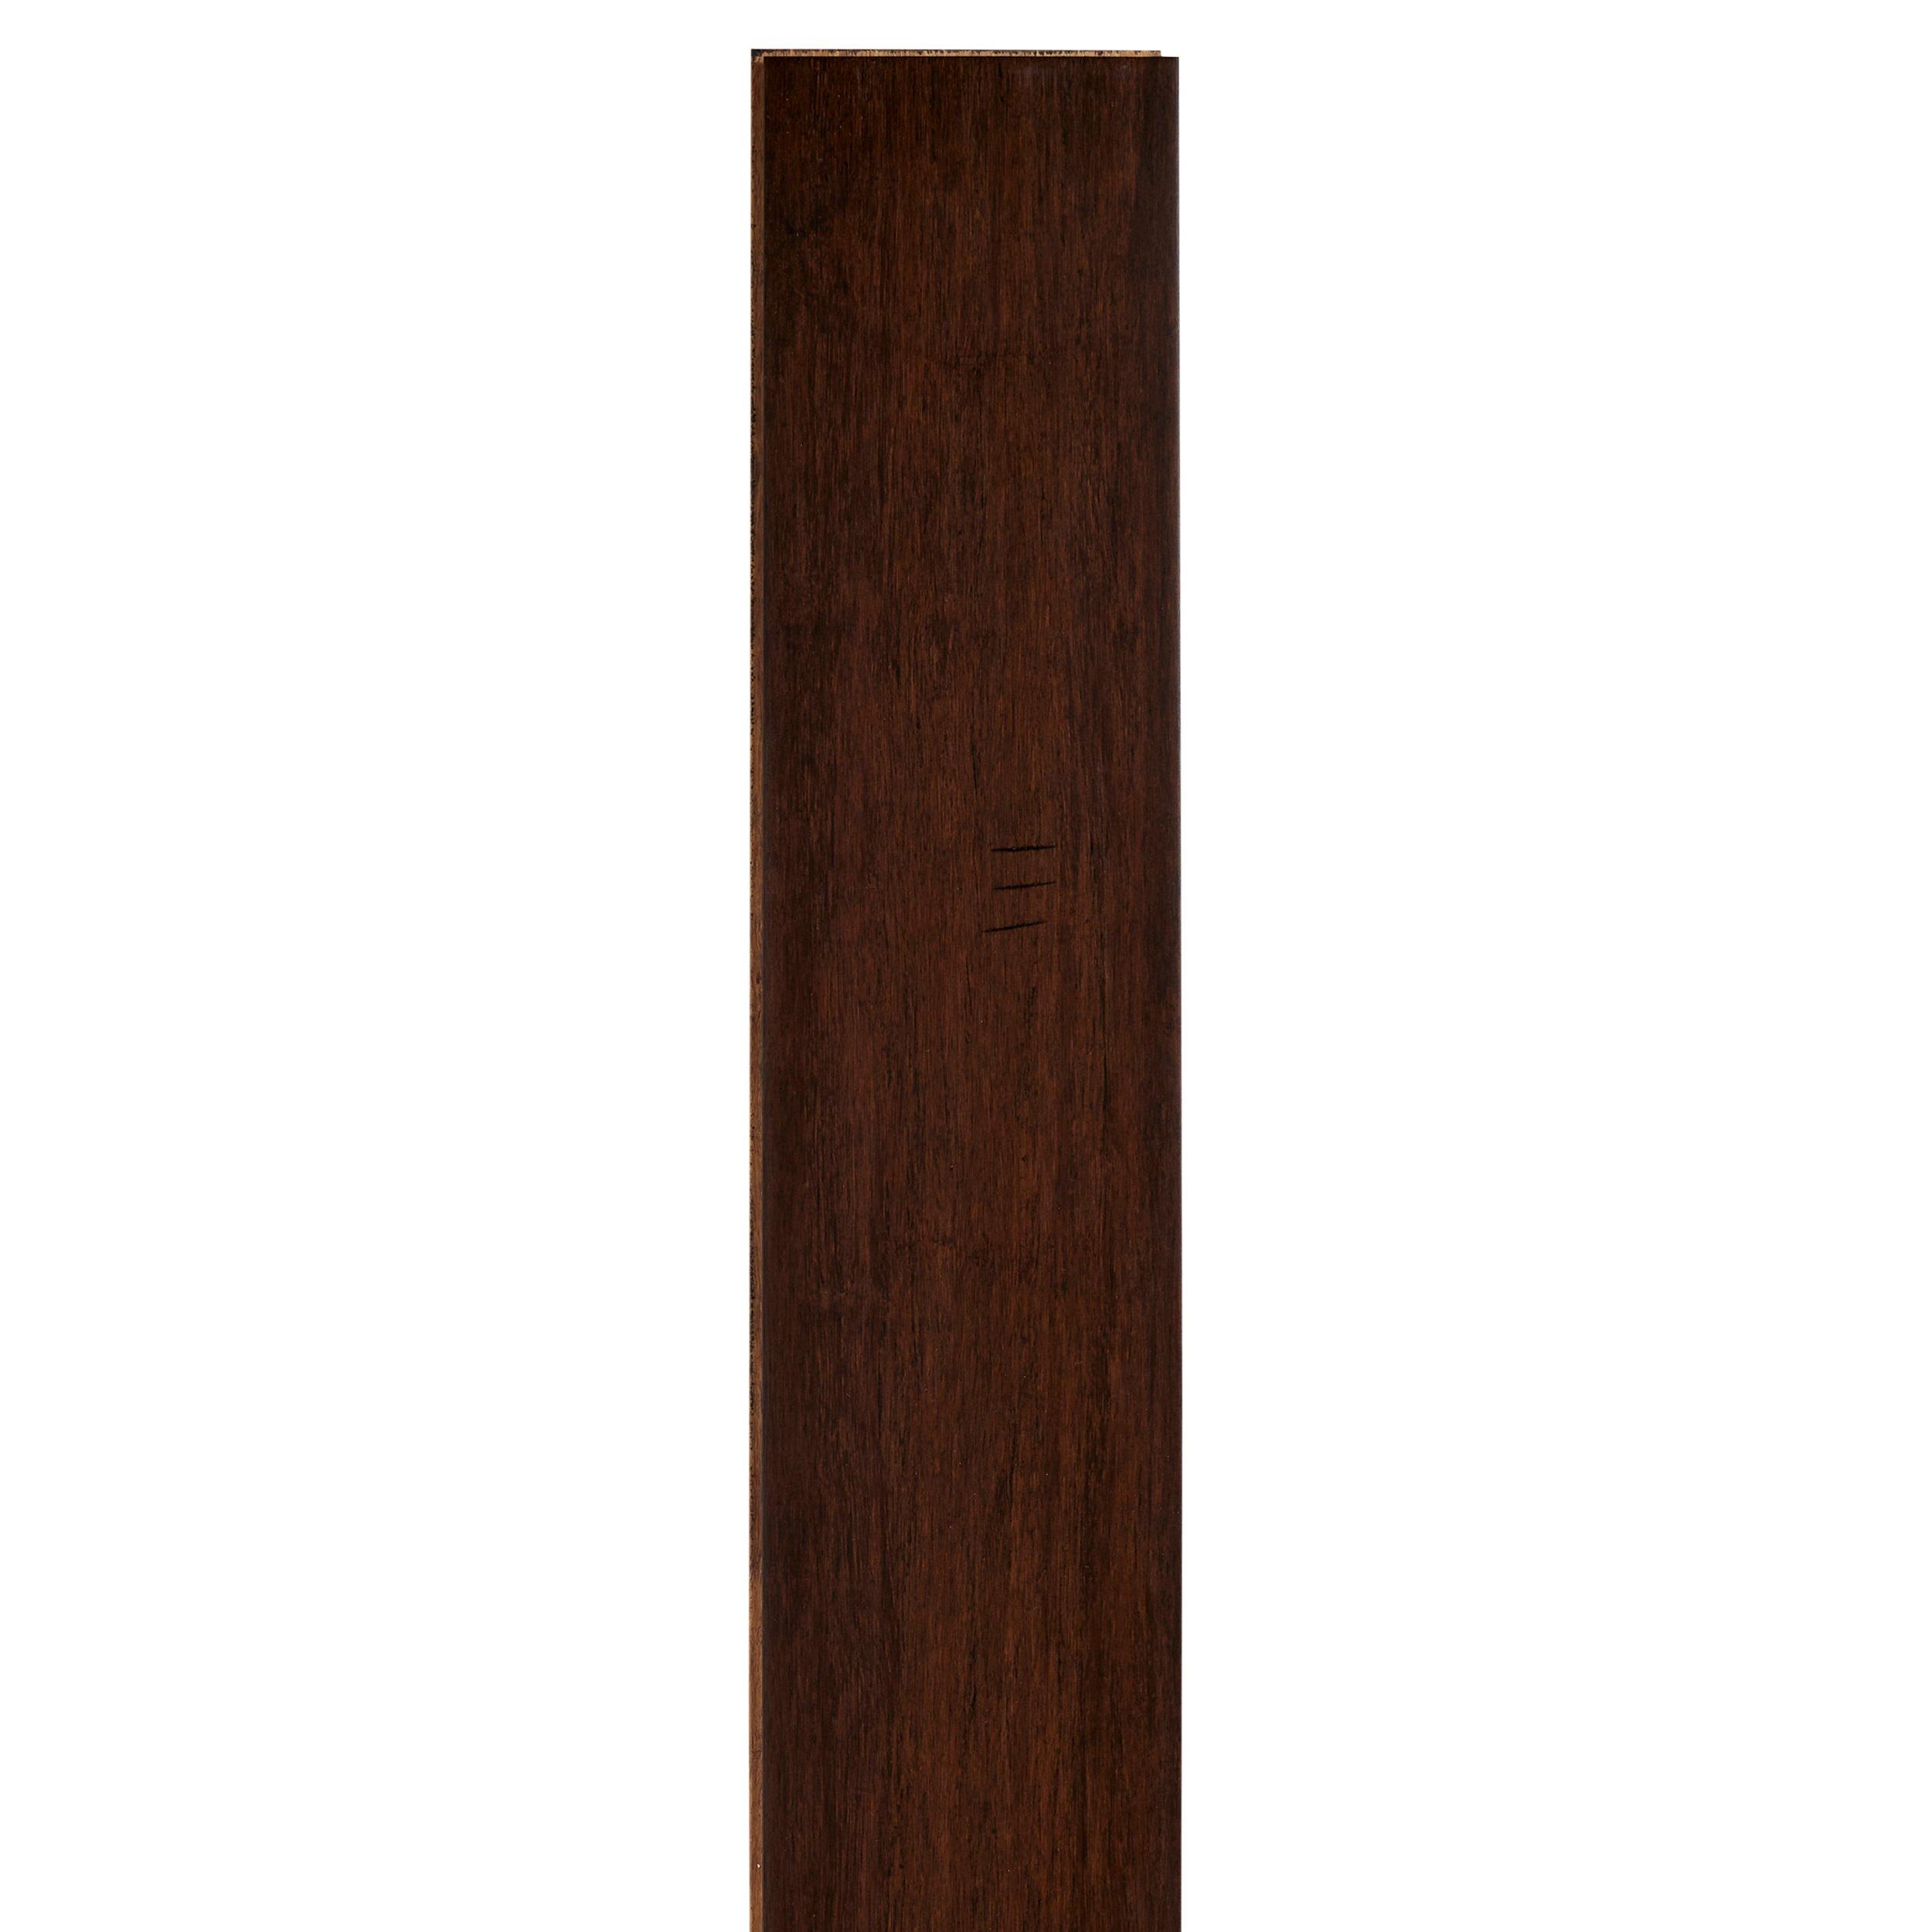 Palazzo Hand Scraped Solid Stranded Bamboo | Floor and Decor